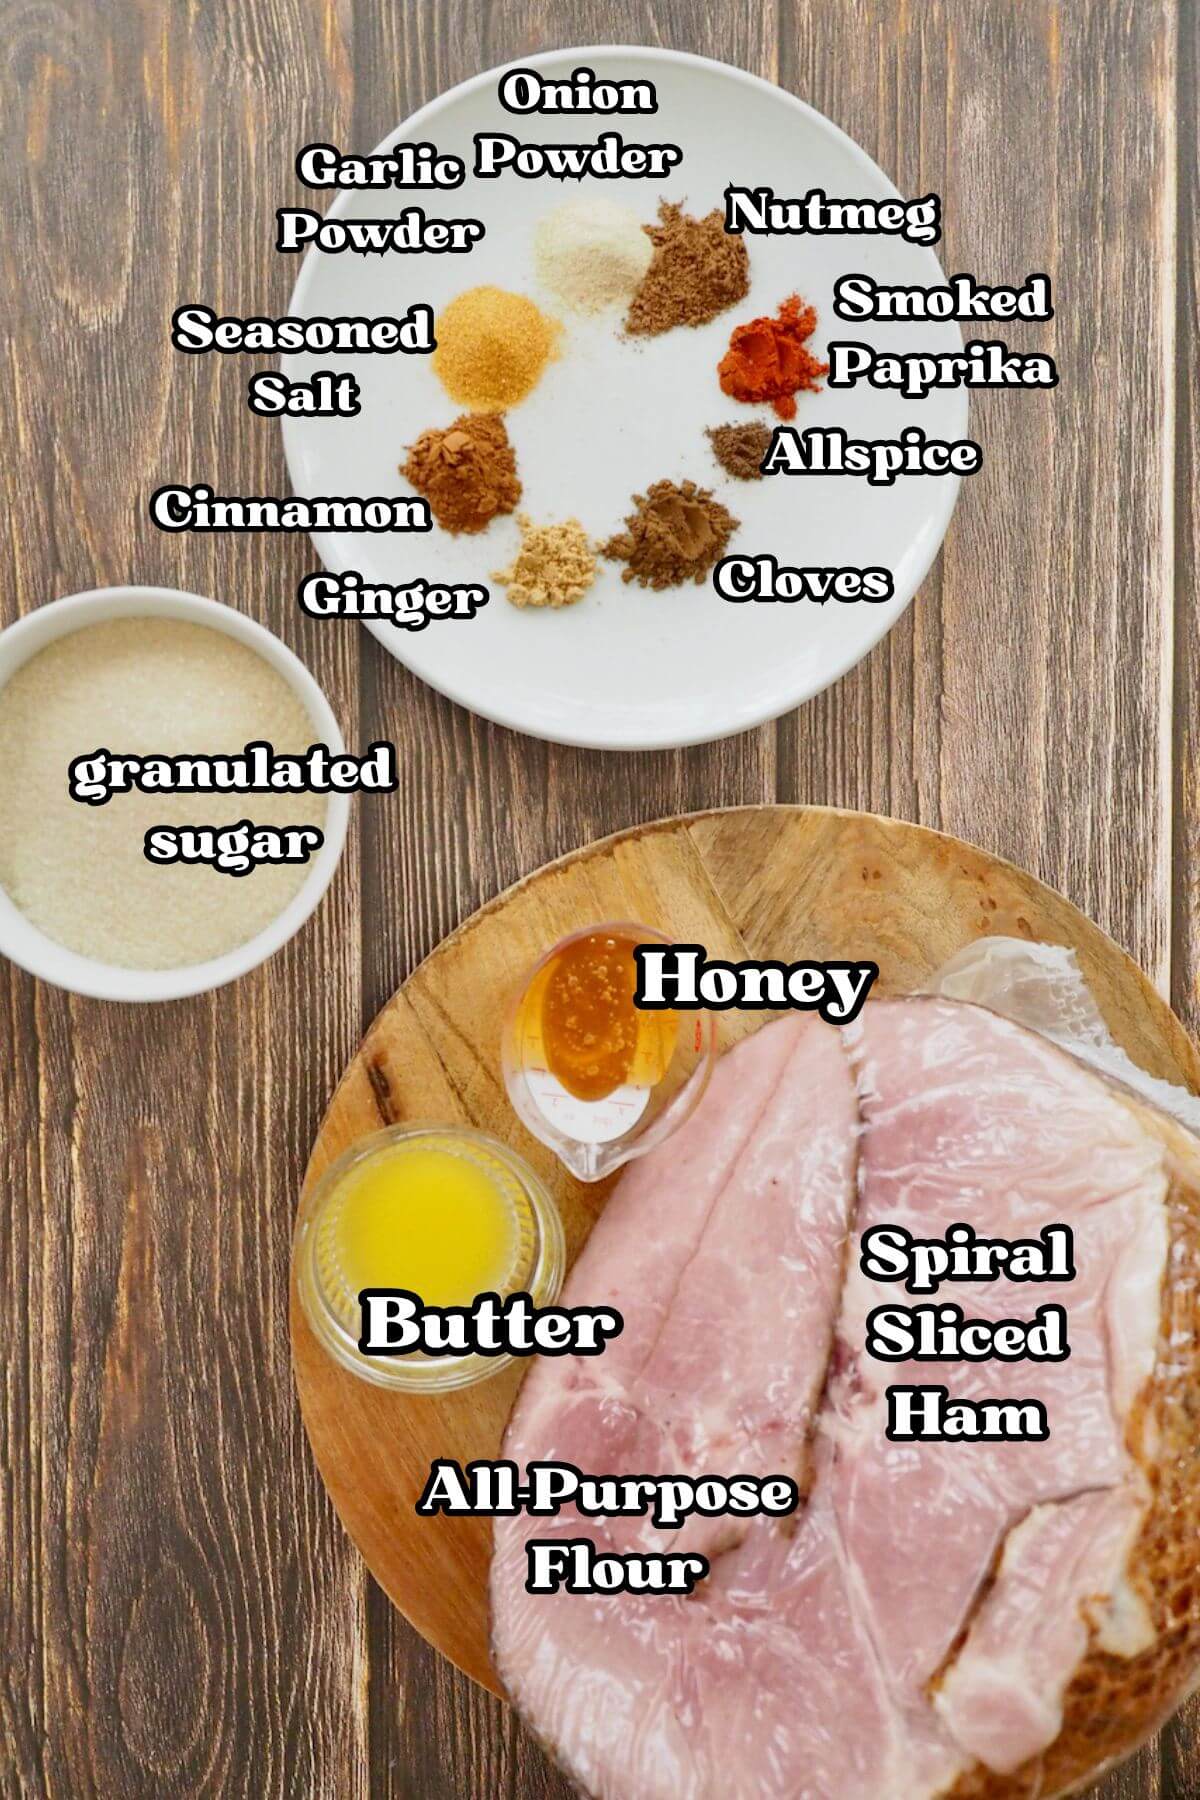 Labeled ingredients for Costco Spiral Ham. Whole bone-in spiral ham, sugar, butter, honey, spices on plate.